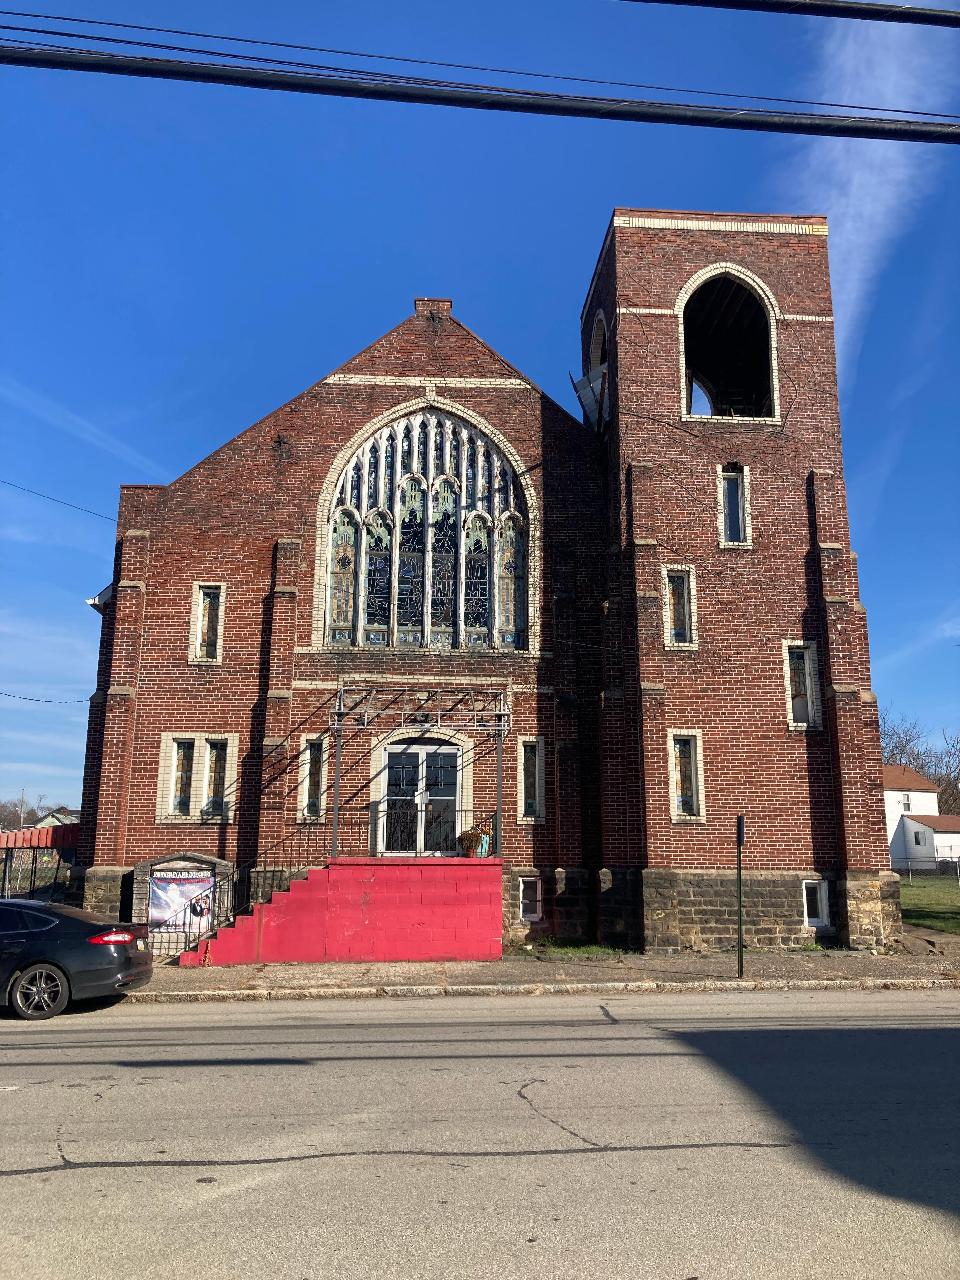 Brick Gothic Revival church with large stained glass window above entrance.